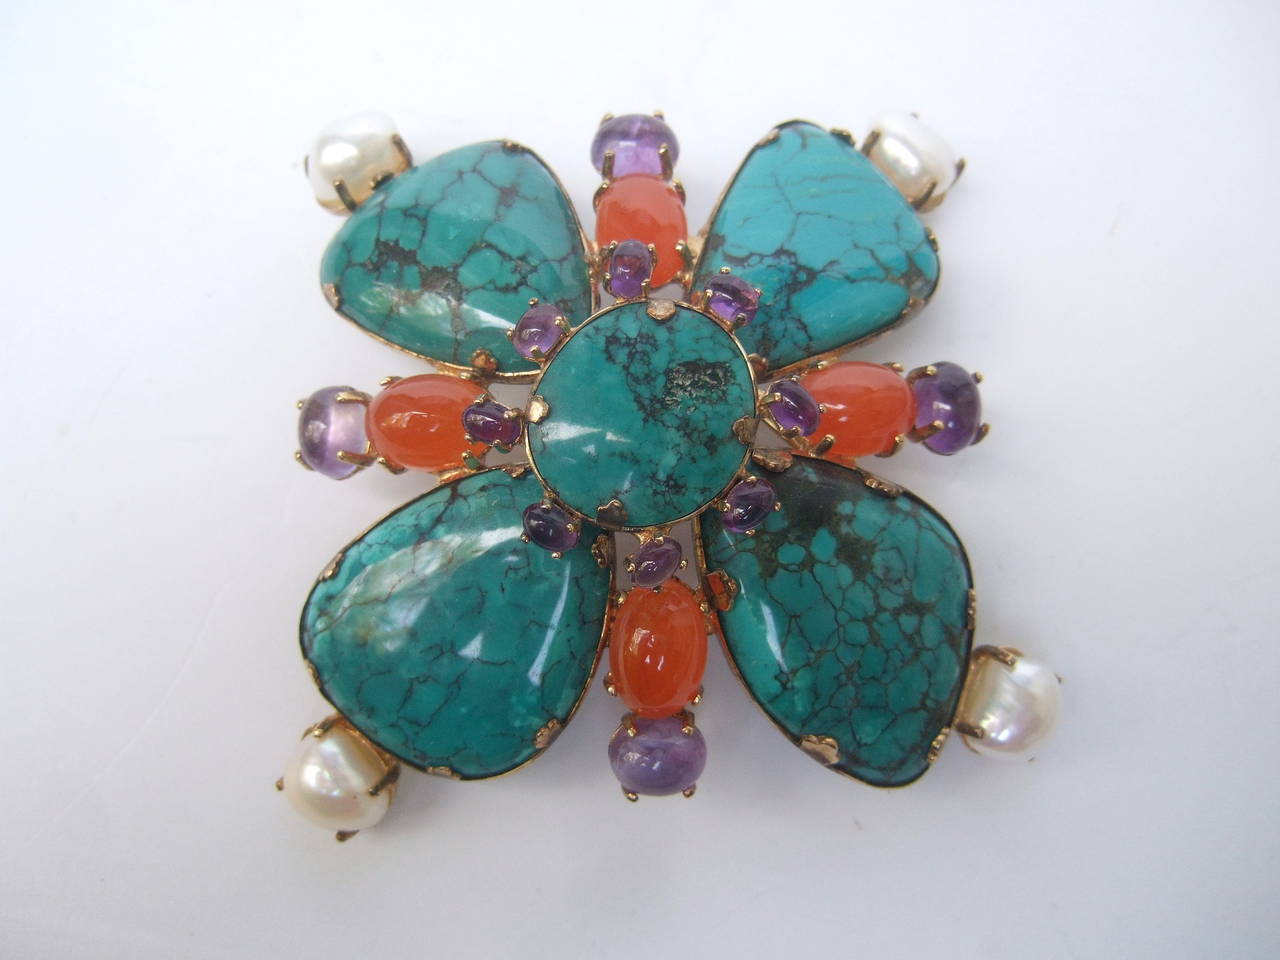 Spectacular Jeweled Semi Precious Massive Sterling Brooch, 1999 For Sale 6